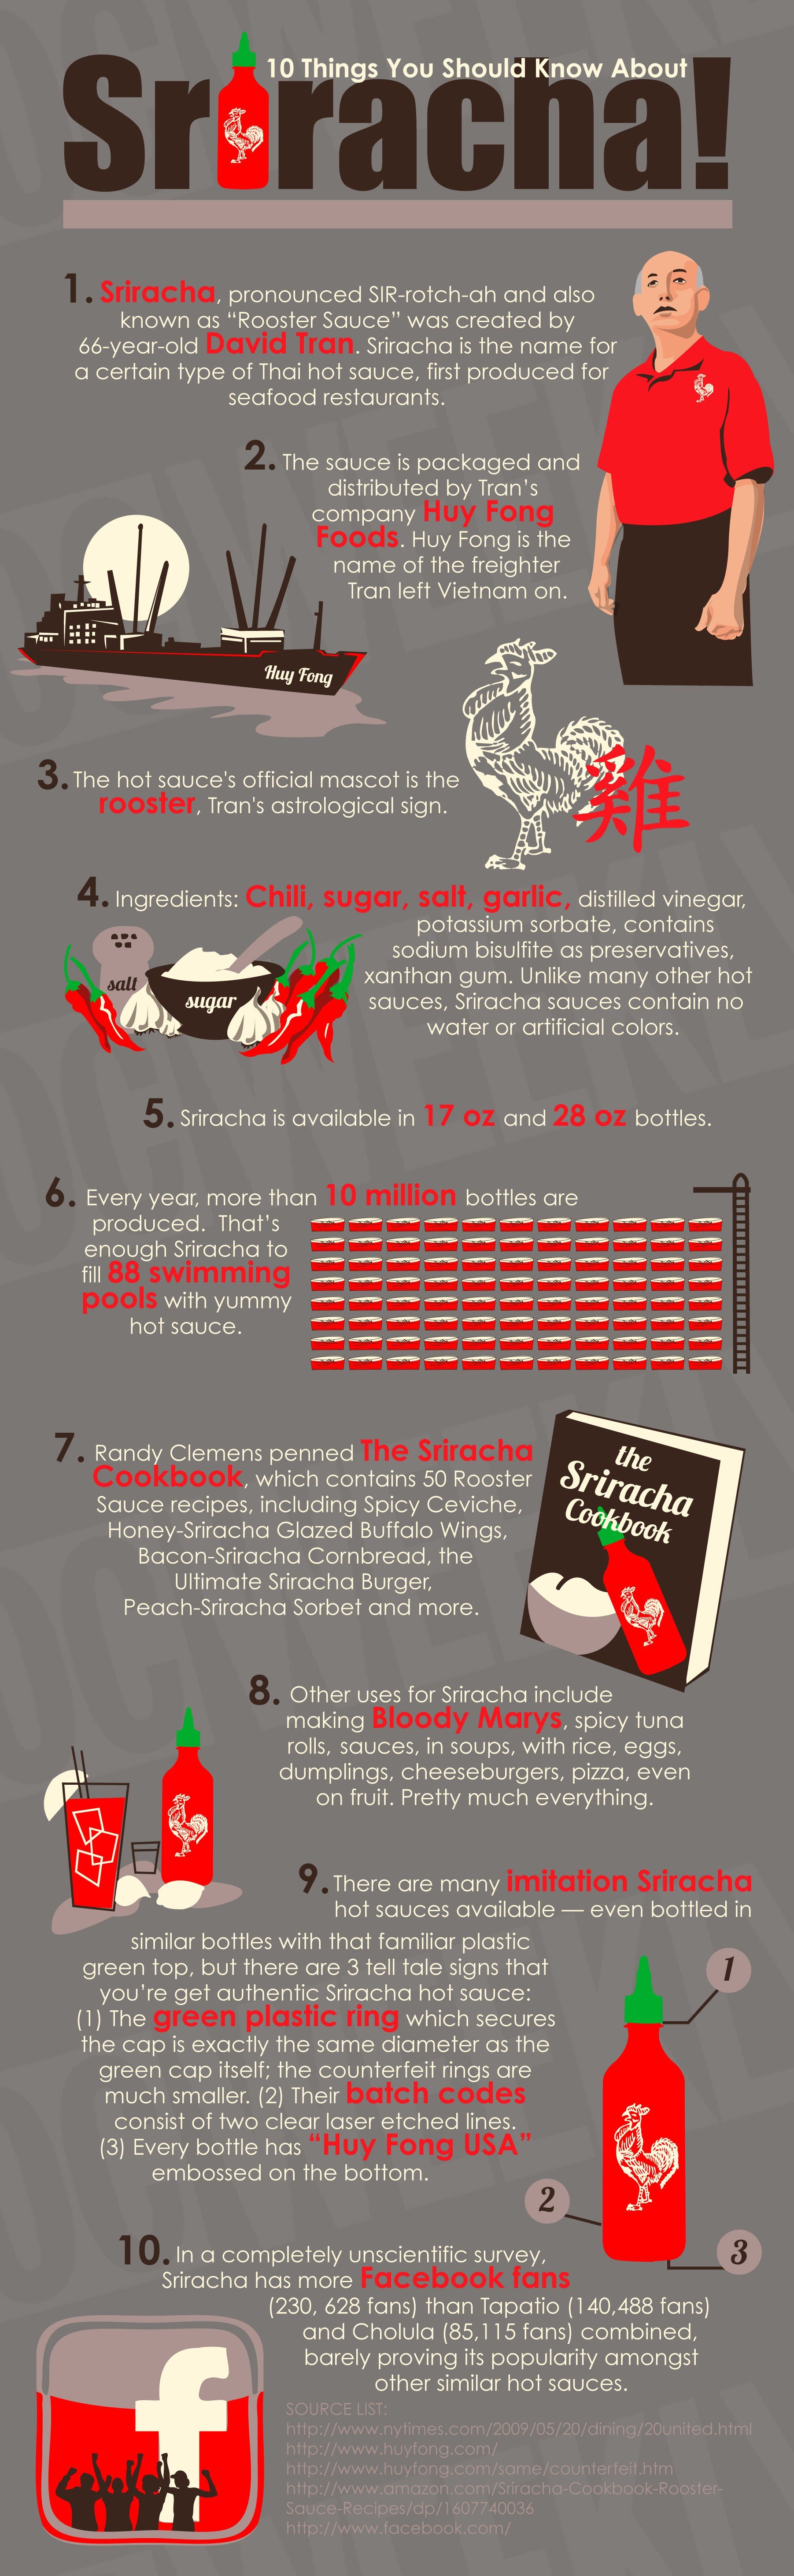 10 Things You Should Know About Sriracha